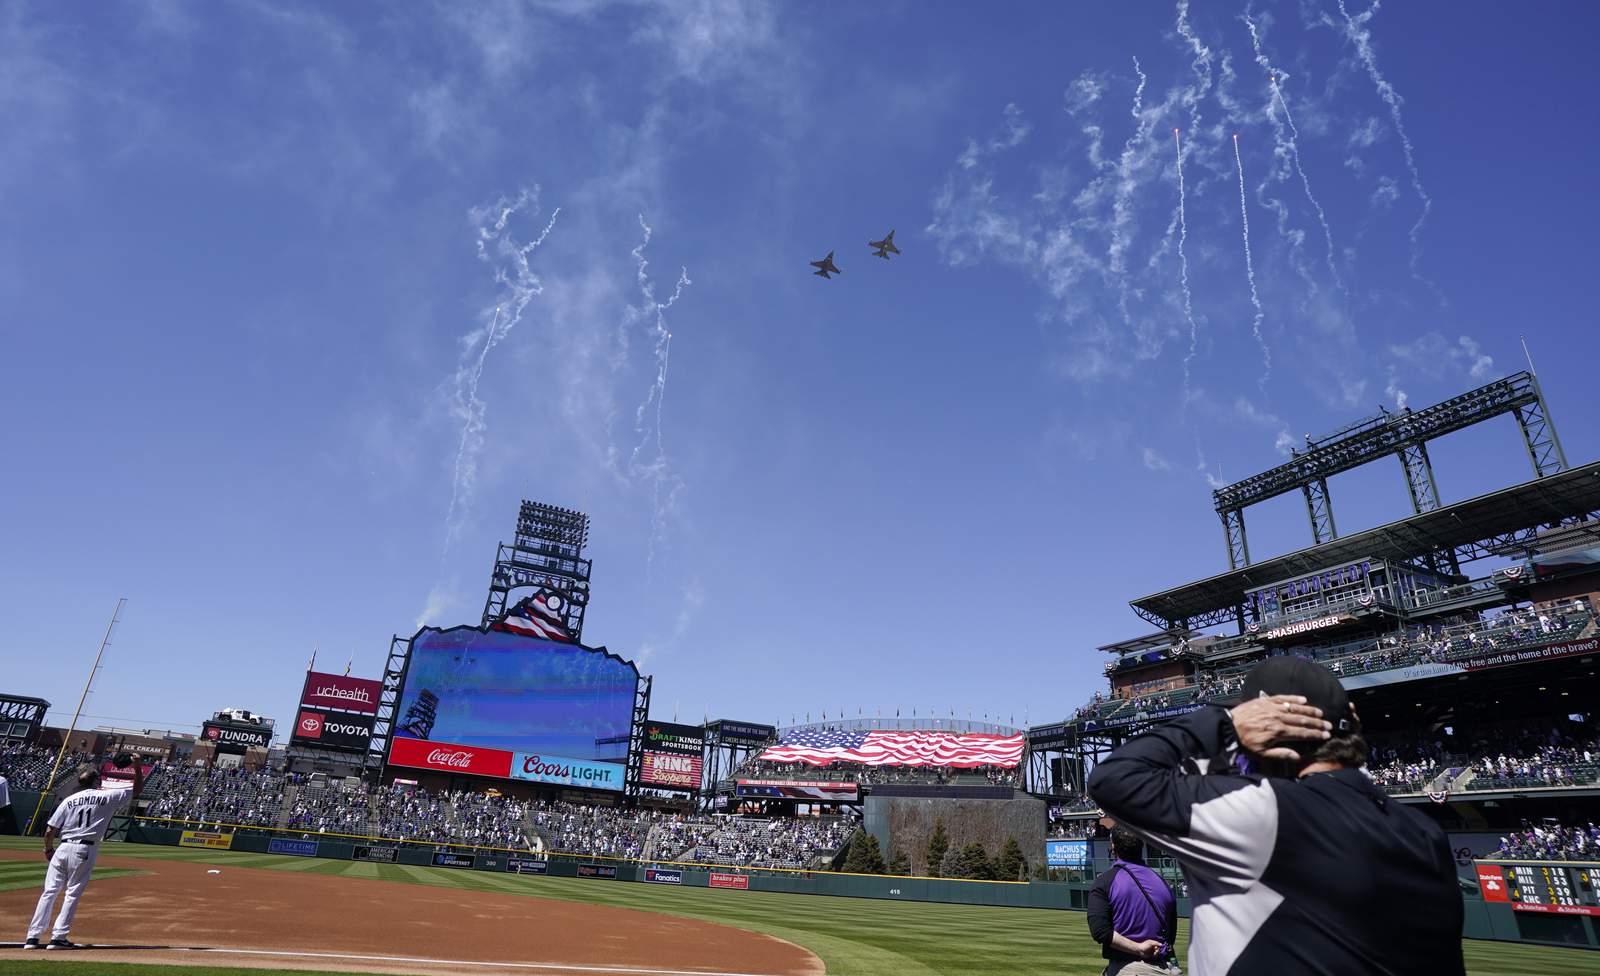 MLB officially moves All-Star Game to Denver’s Coors Field